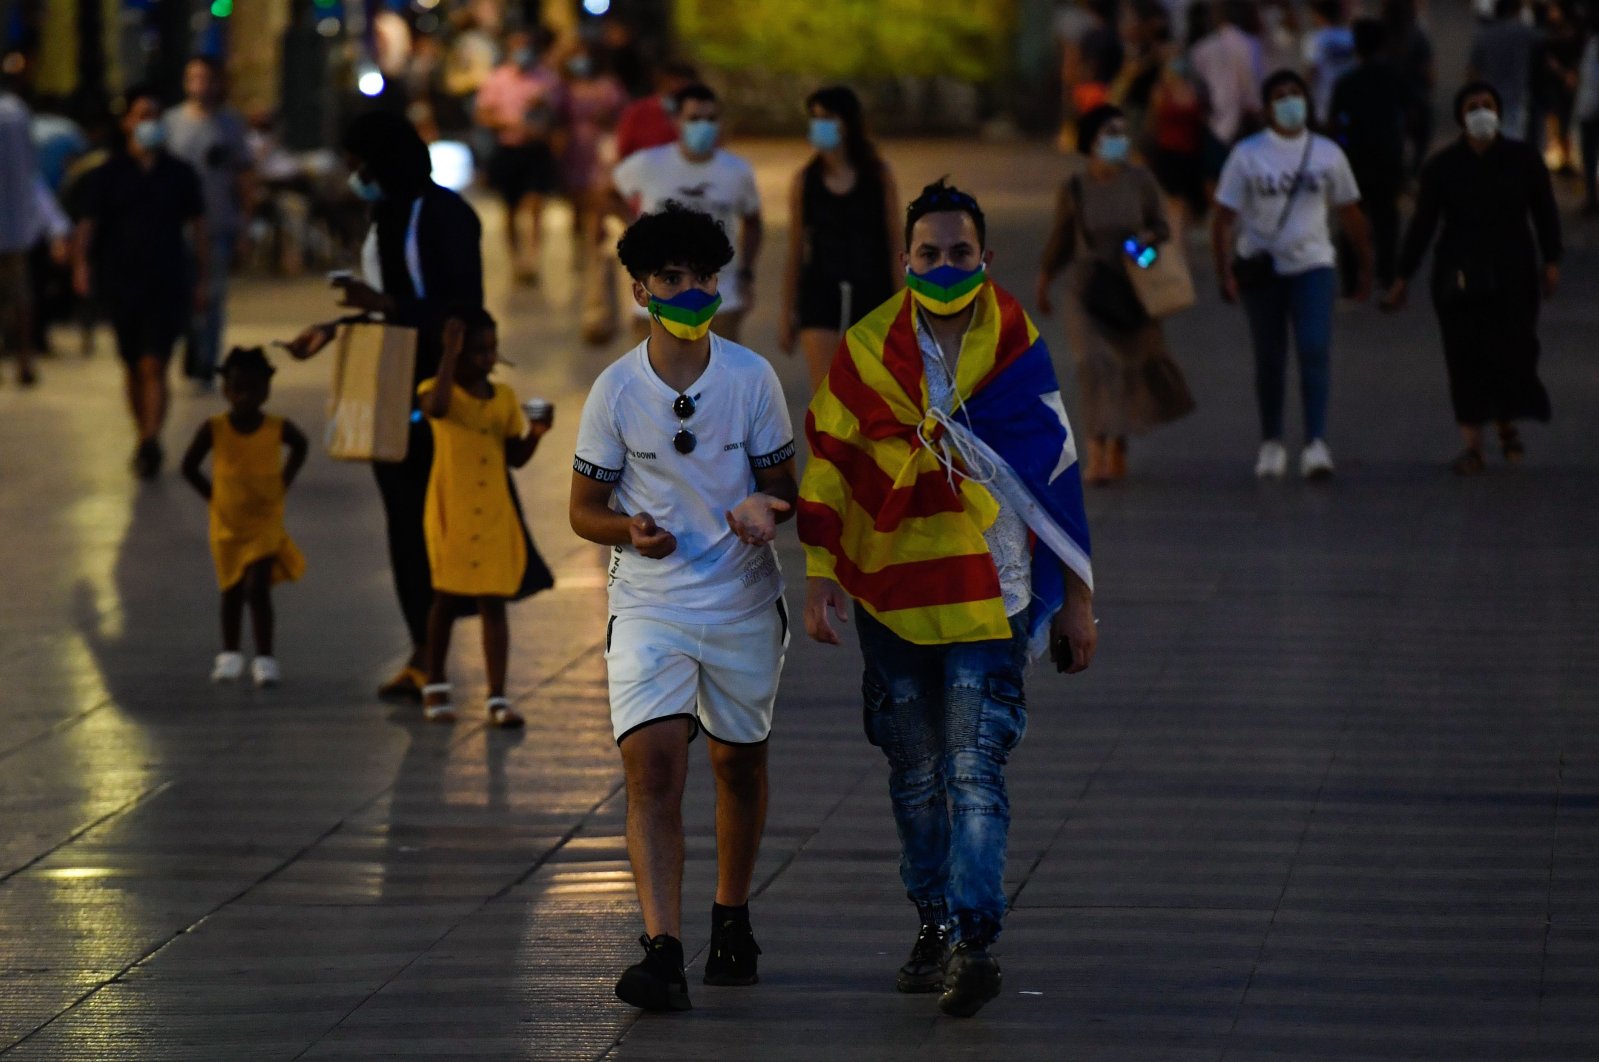 A man wrapped in a Catalan pro-independence "Estelada" flag walks on Las Ramblas street in Barcelona on July 25, 2020. (AFP Photo)